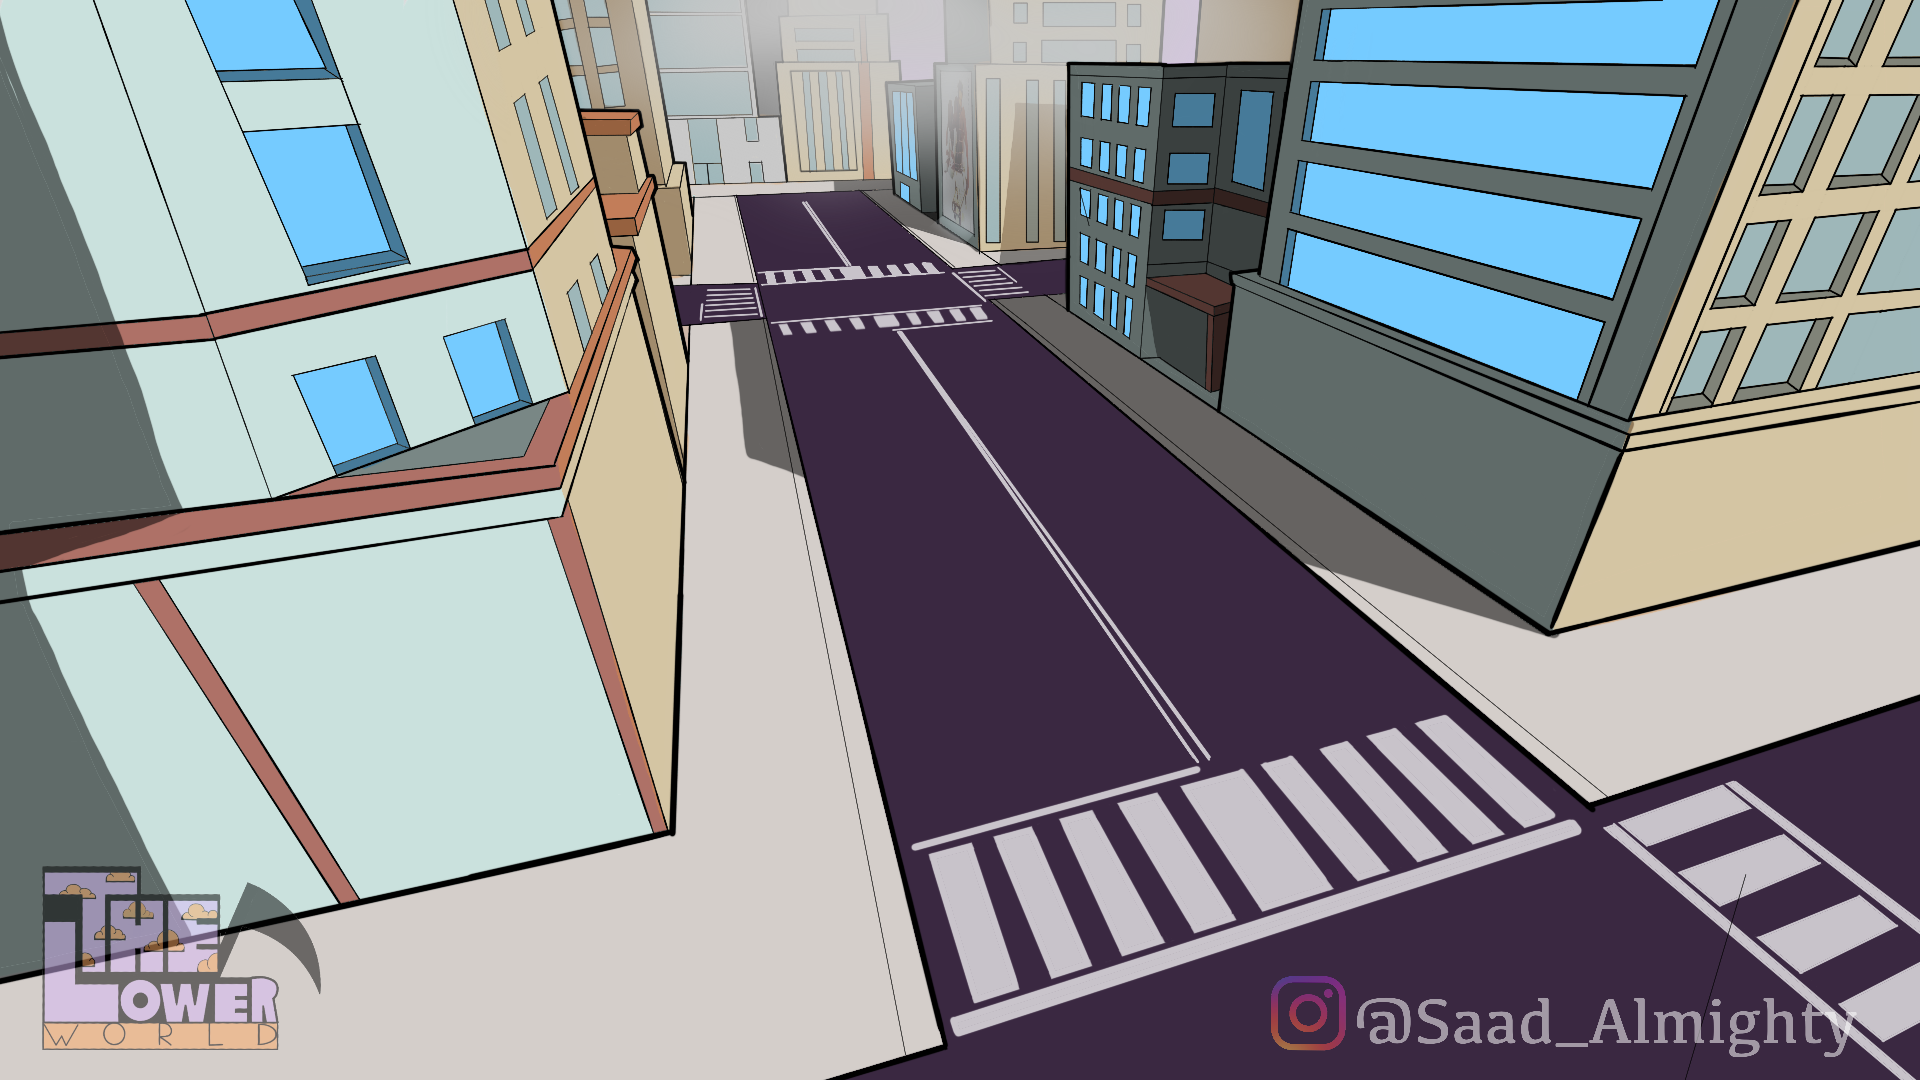 The Lower World / Still of background concept design from "The Lower World," an animated episodic sitcom created using Photoshop, Callipeg, ToonBoom, and Autodesk Sketchbook.